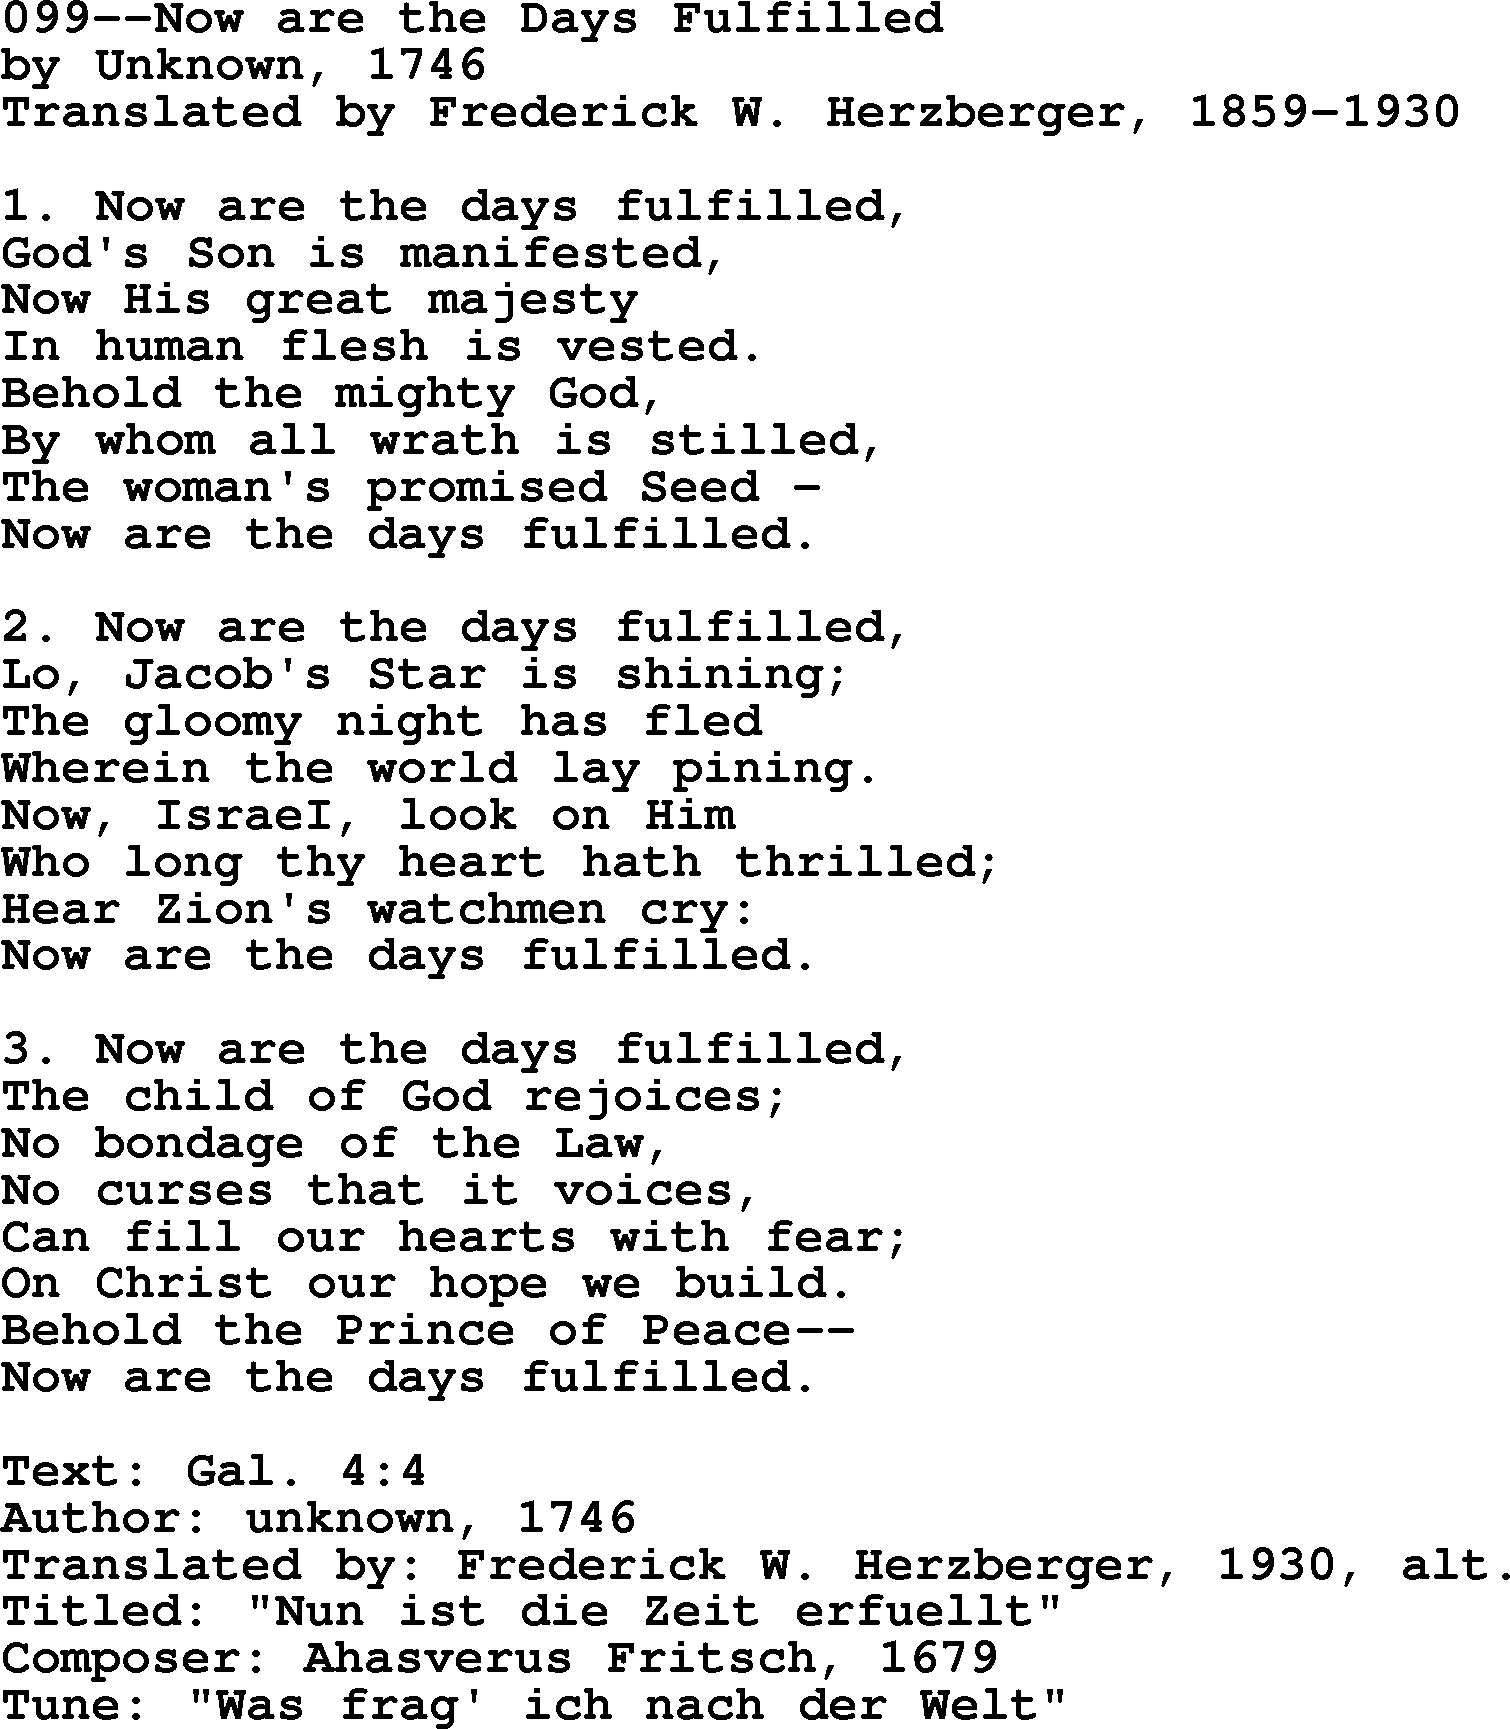 Lutheran Hymn: 099--Now are the Days Fulfilled.txt lyrics with PDF